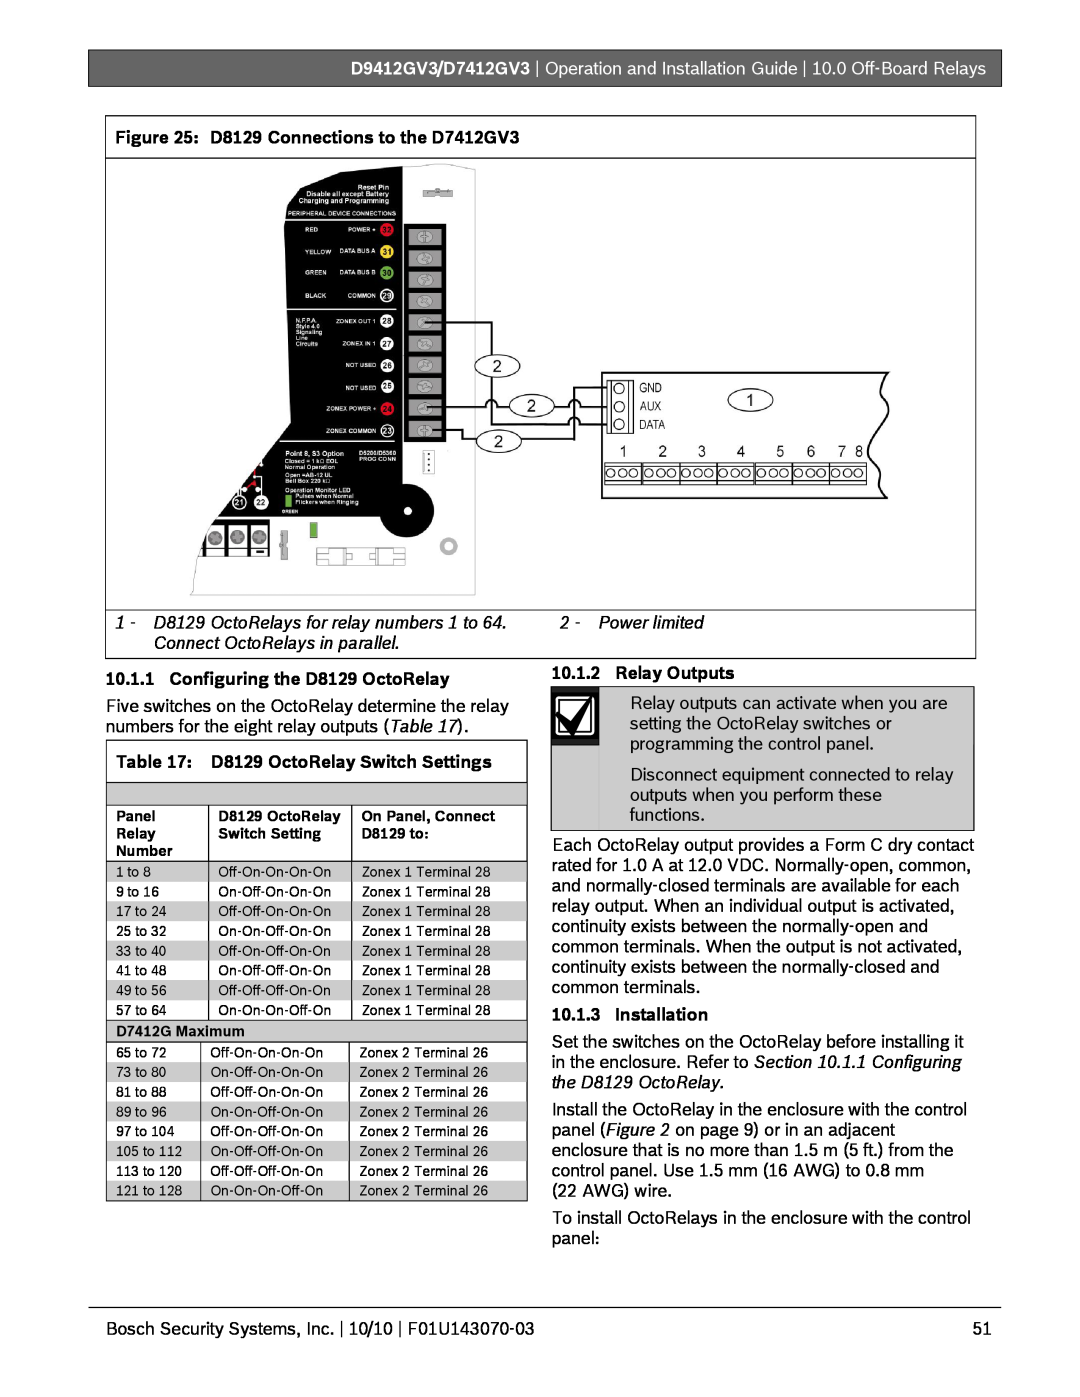 Bosch Appliances D8129 Connections to the D7412GV3, Configuring the D8129 OctoRelay, D8129 OctoRelay Switch Settings 